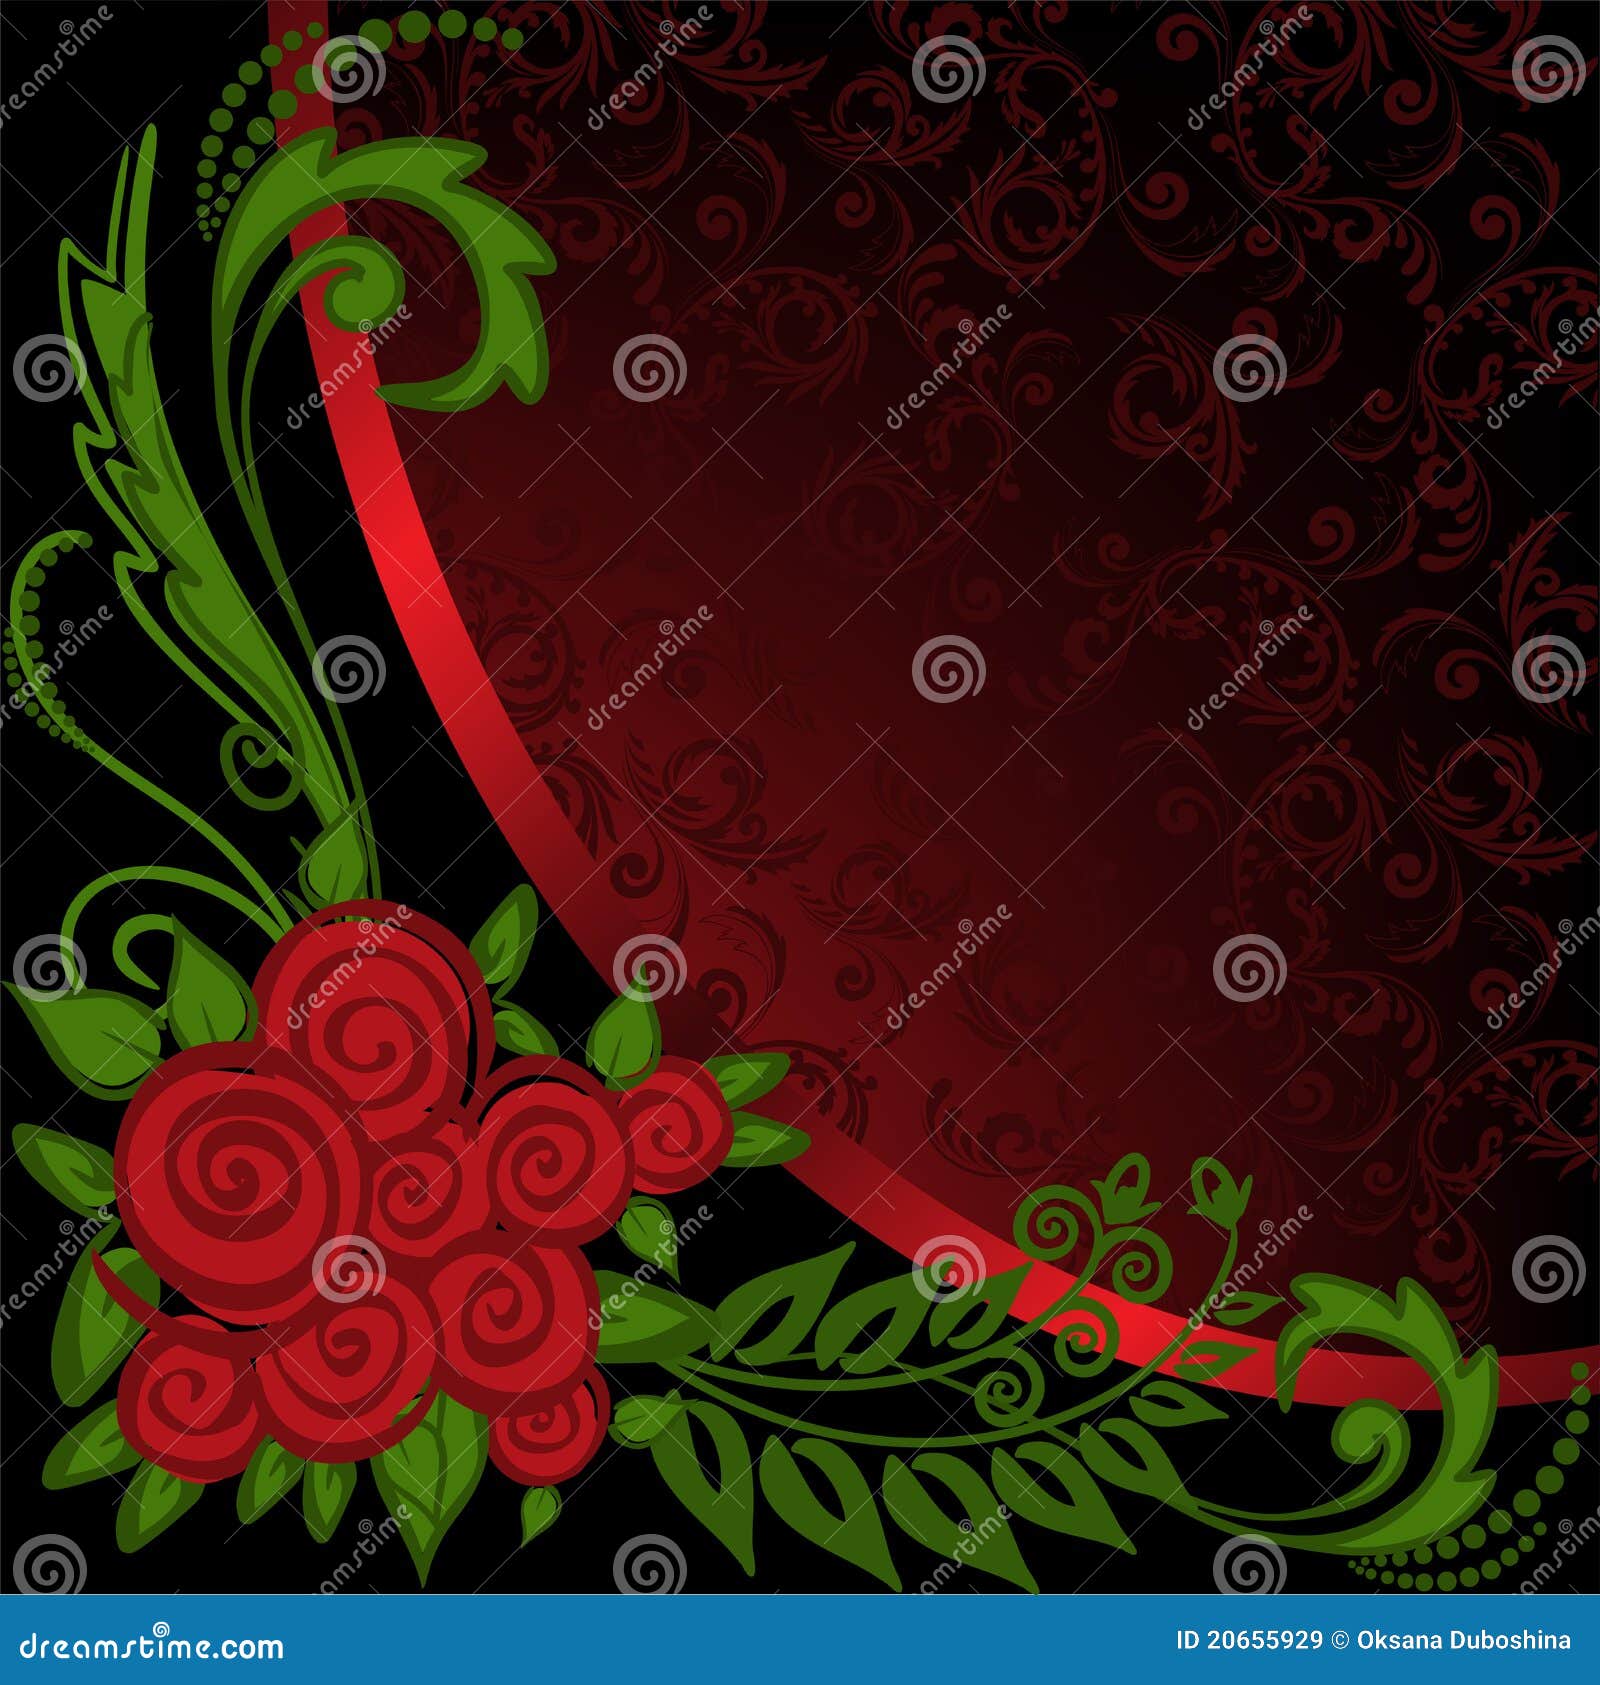 asymmetrical black and red background